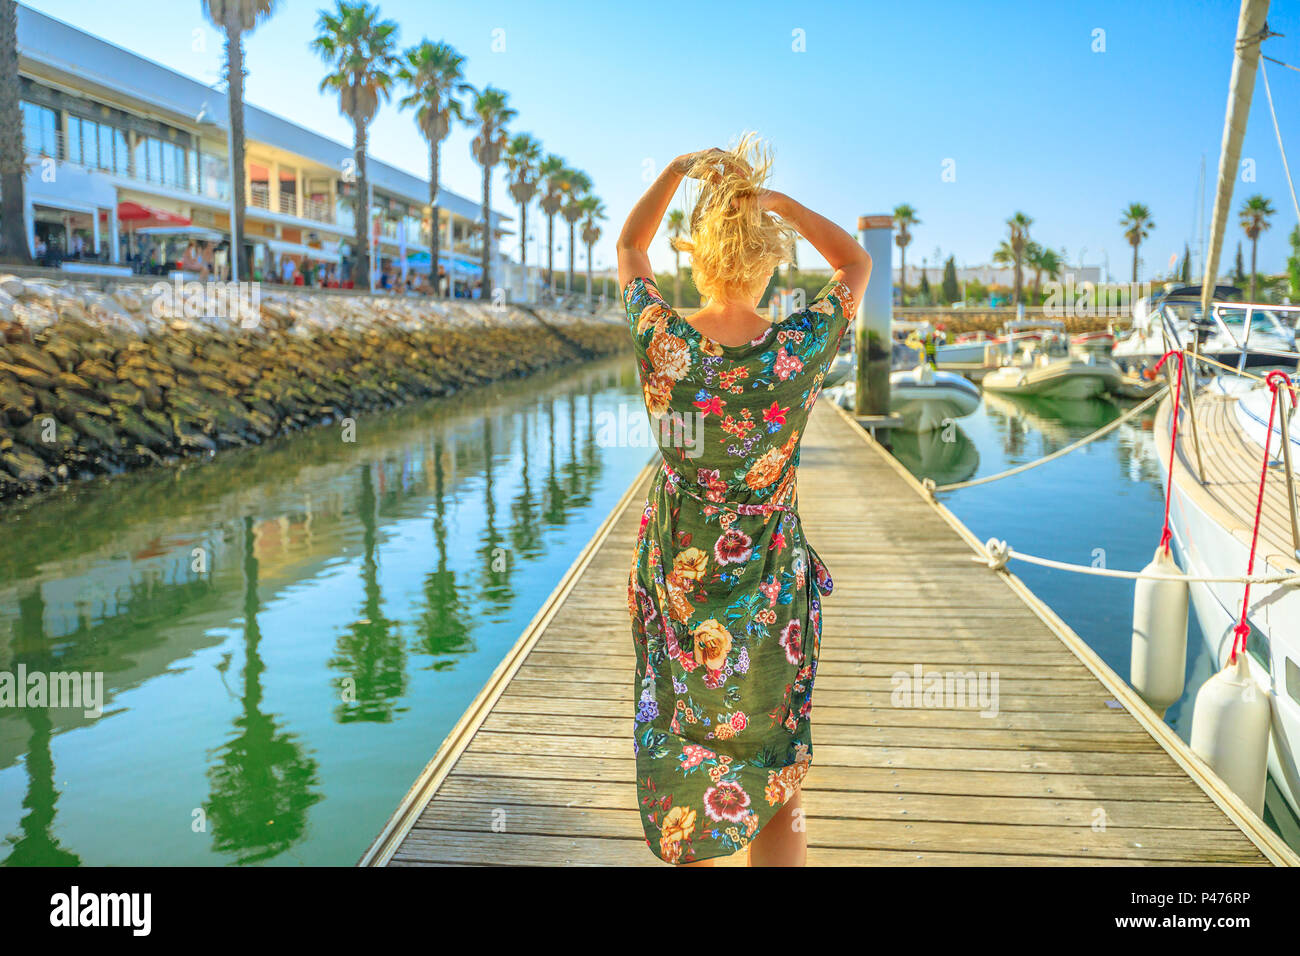 Tourism in Portugal. Lifestyle female tourist on wooden jetty at Marina de Lagos on Algarve coast, Portugal, Europe. Caucasian woman looking at the Bay of Lagos in summer holidays. Stock Photo